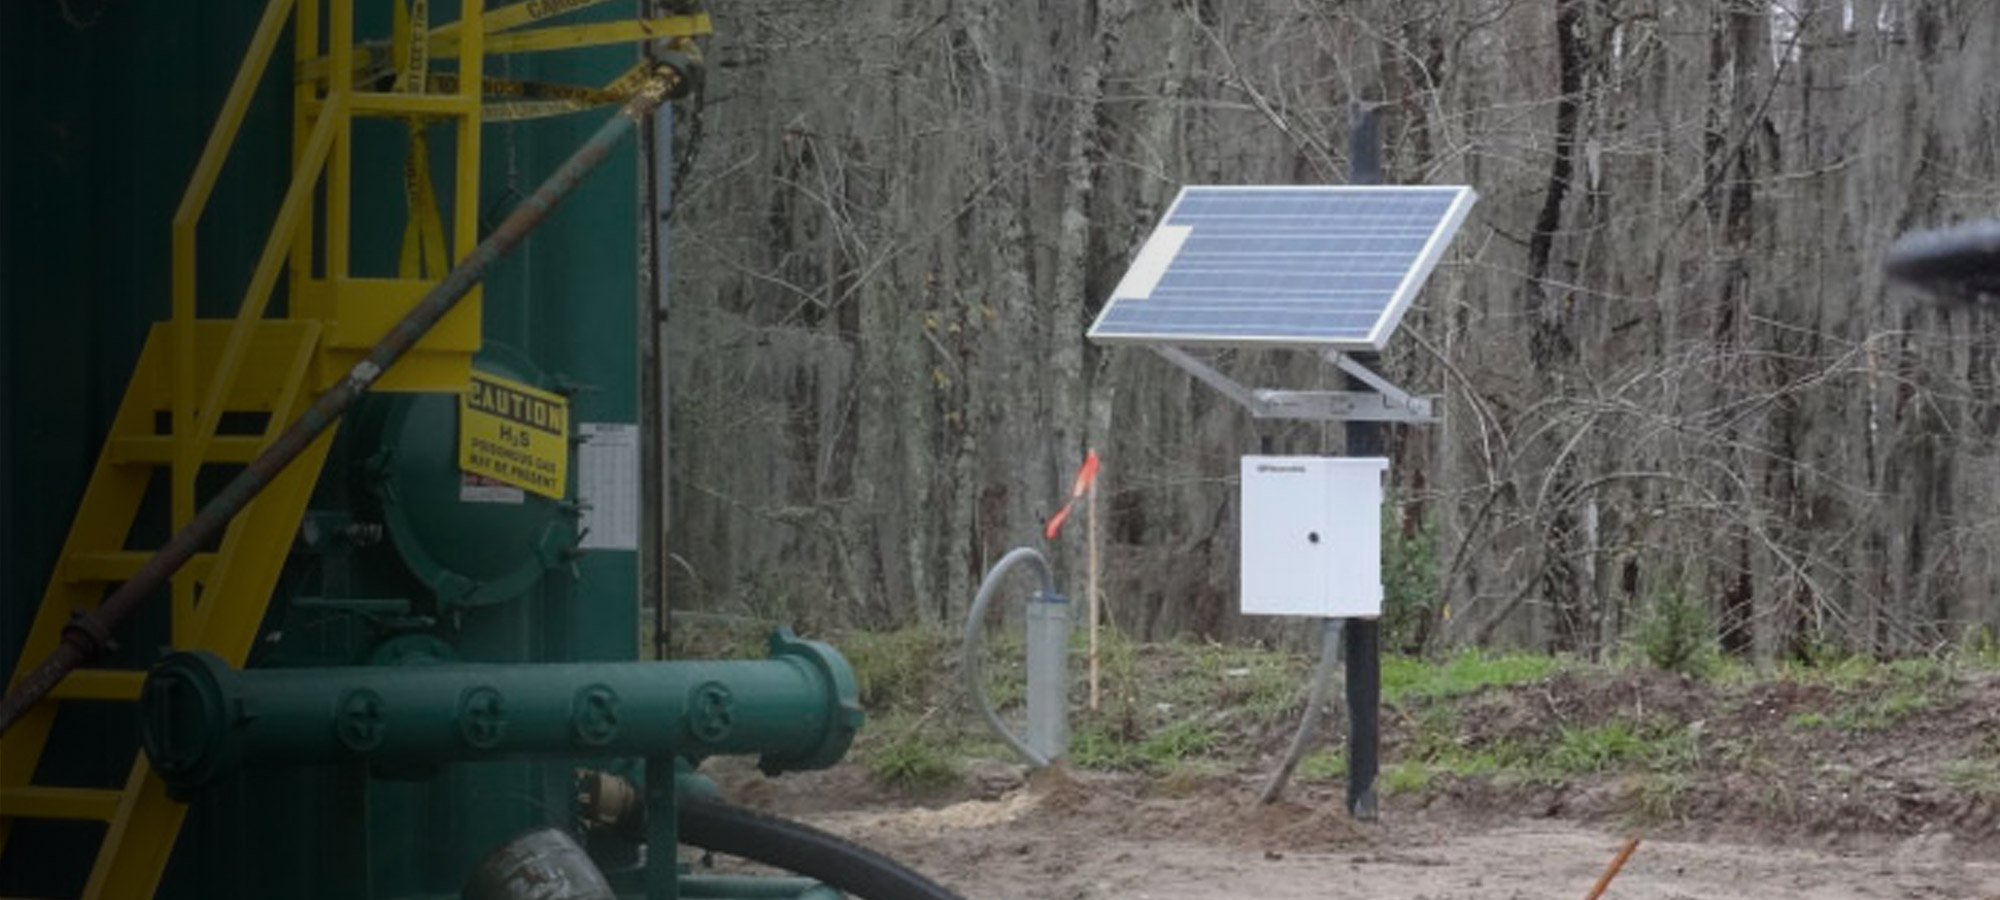 Monitoring station with solar panel attached to a post in a wooded area